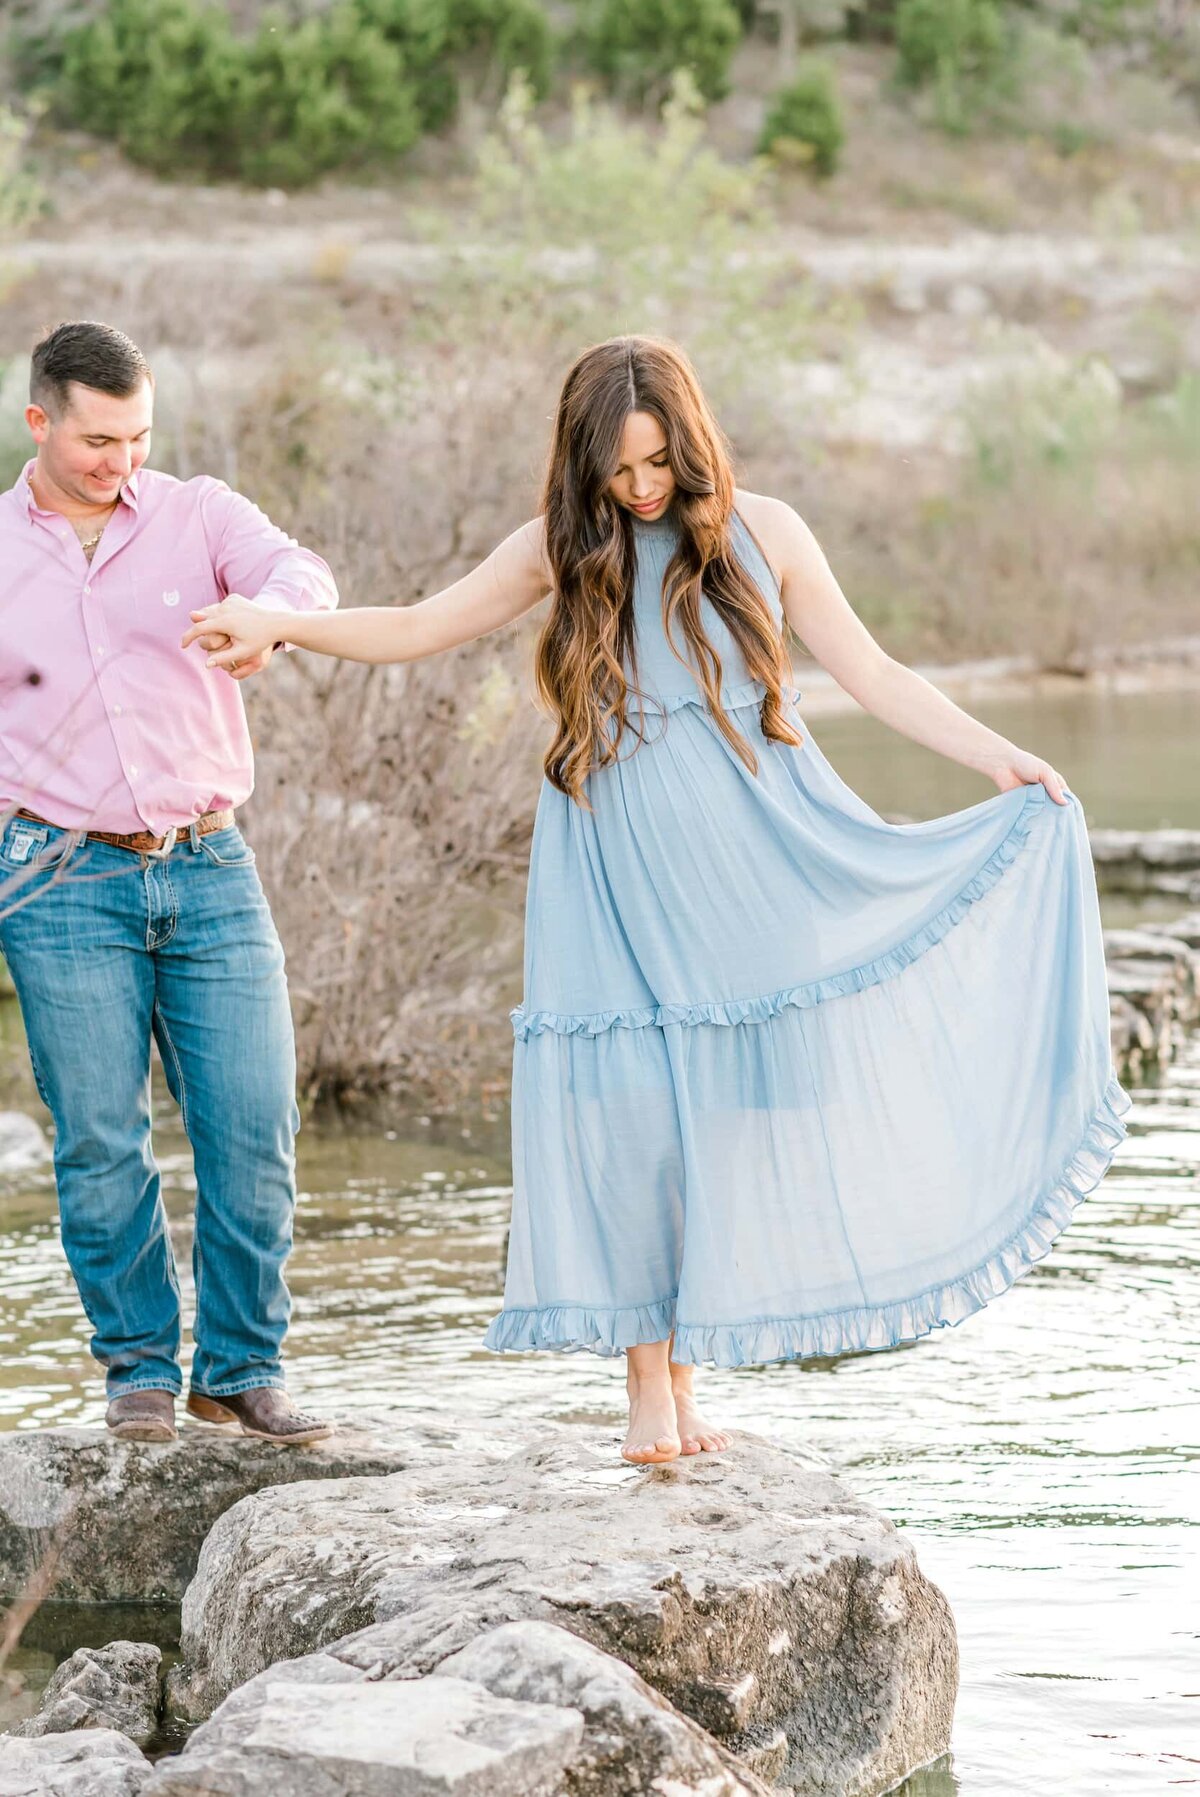 San-Antonio-Maternity-Photography-11.17.21 Sarah Maternity - Laurie Adalle Photography-133